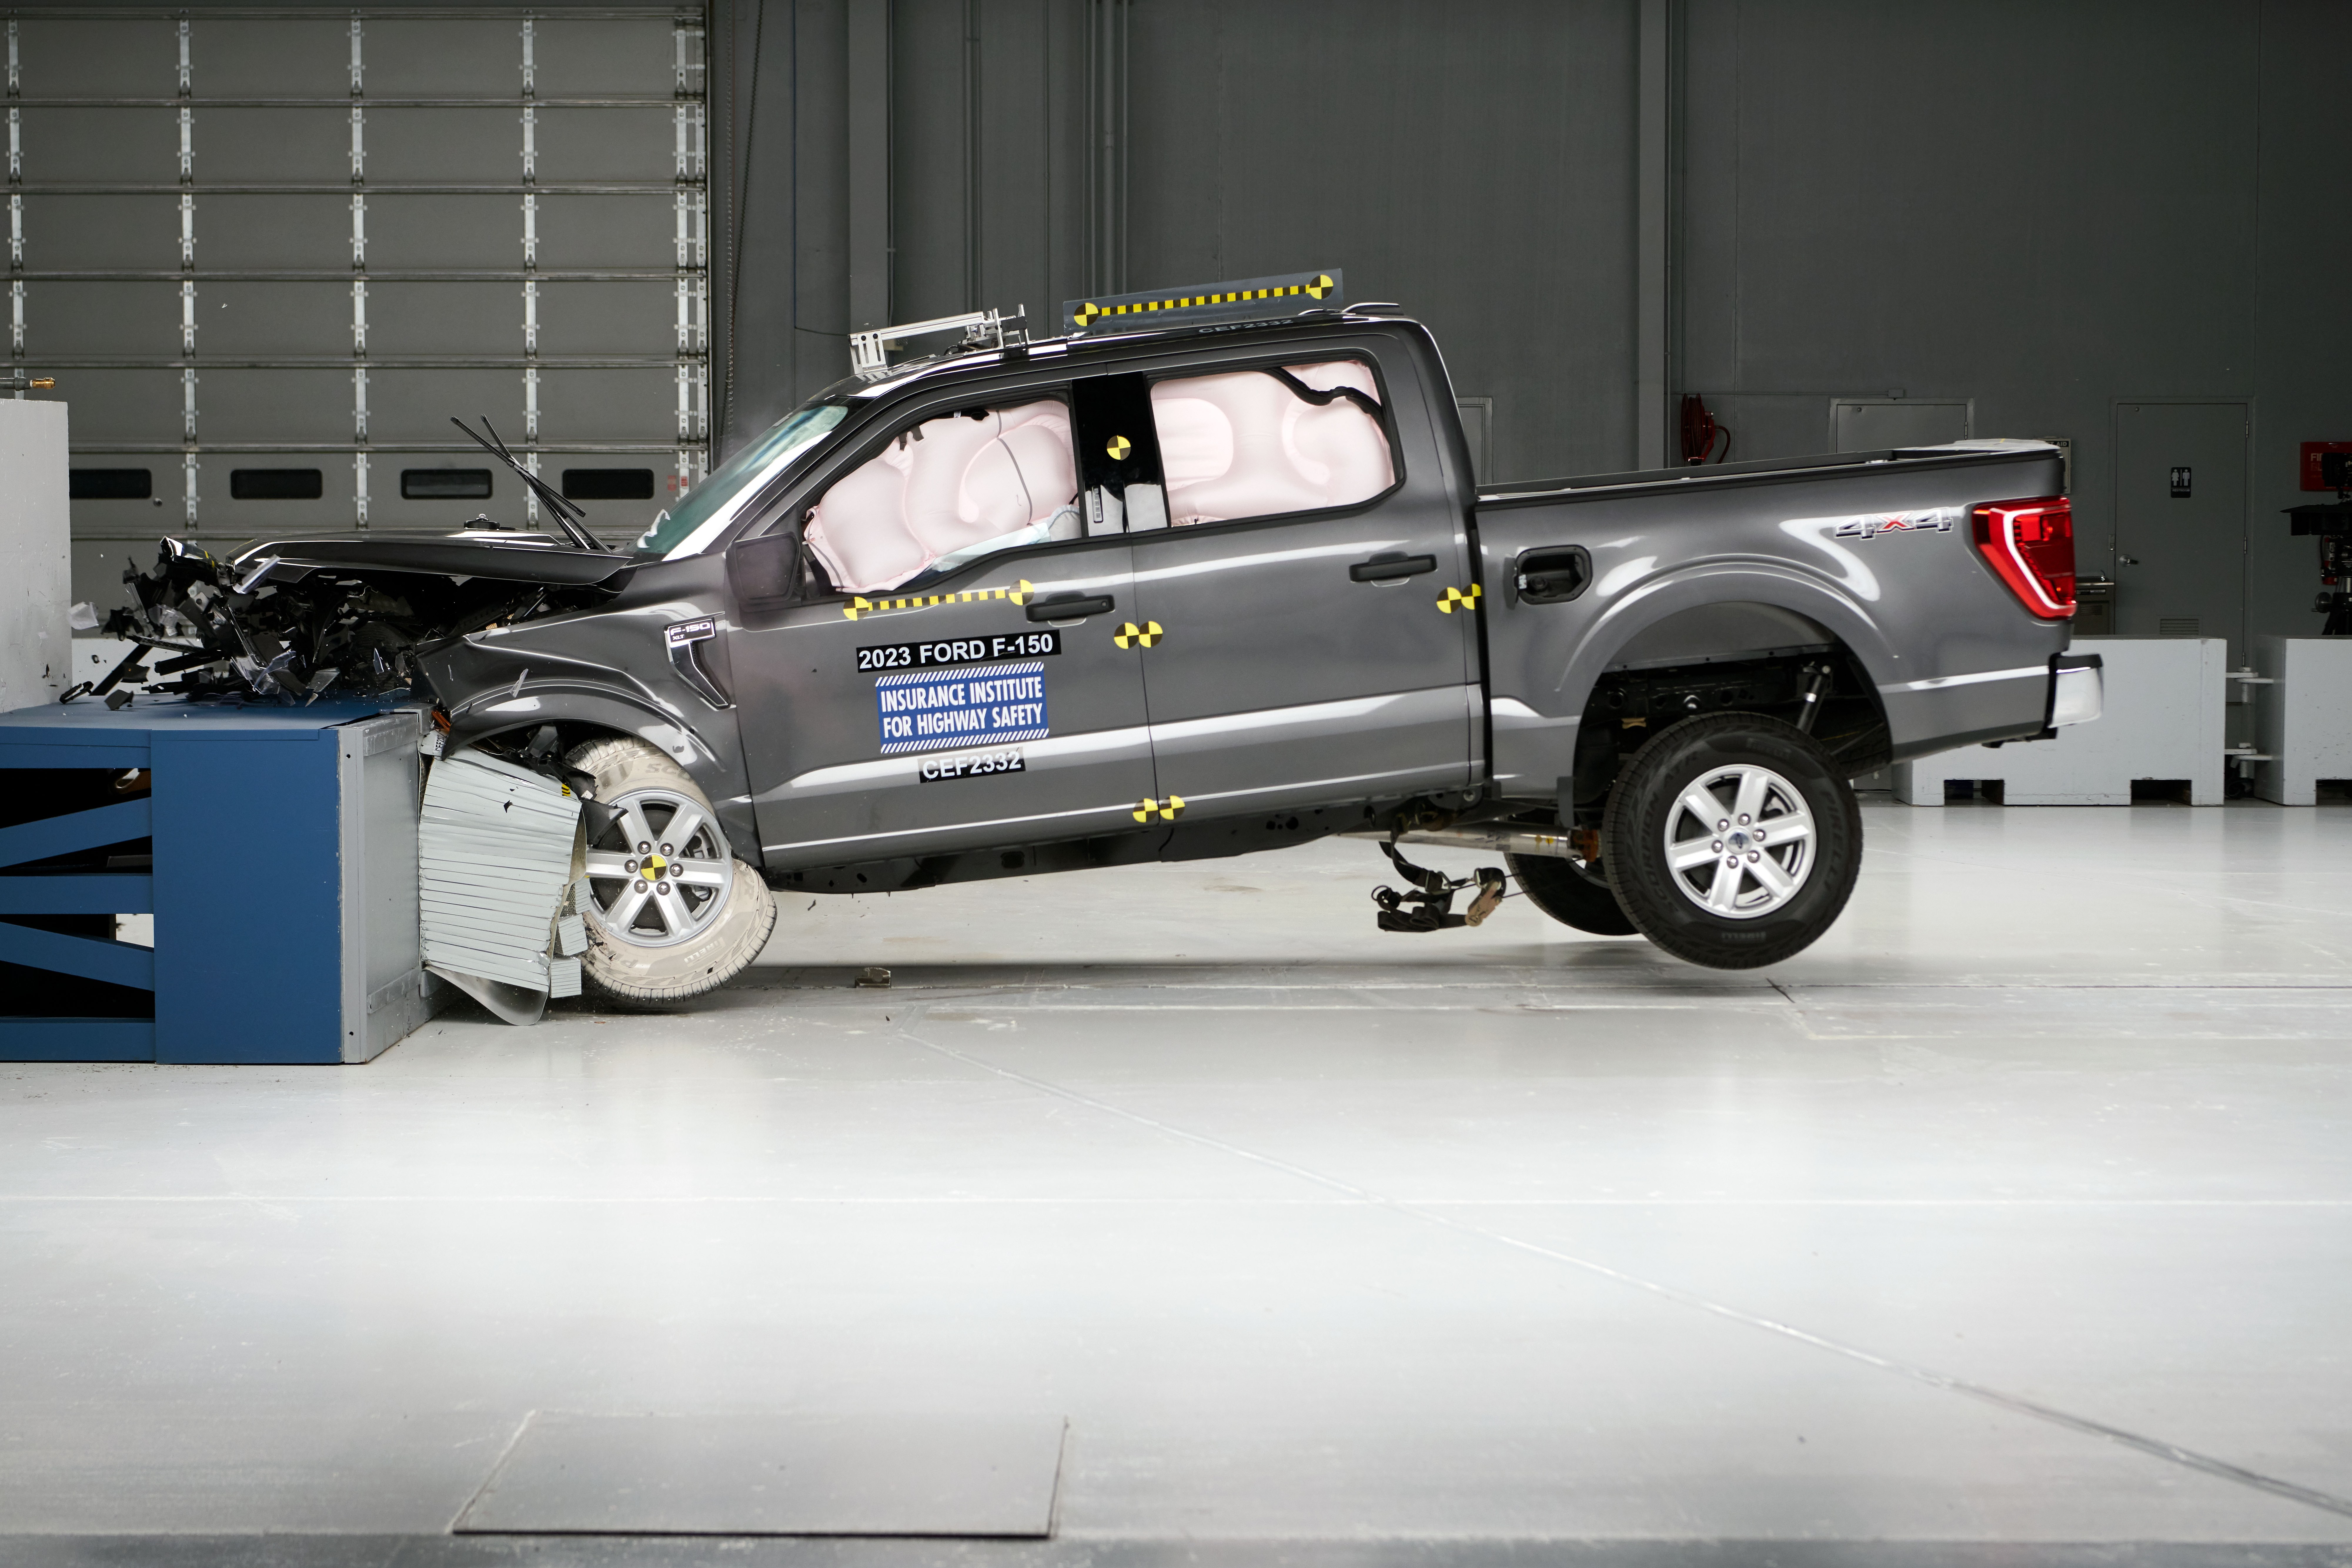 New crash tests of popular pickup truck models raise concerns about passenger safety – NBC Chicago